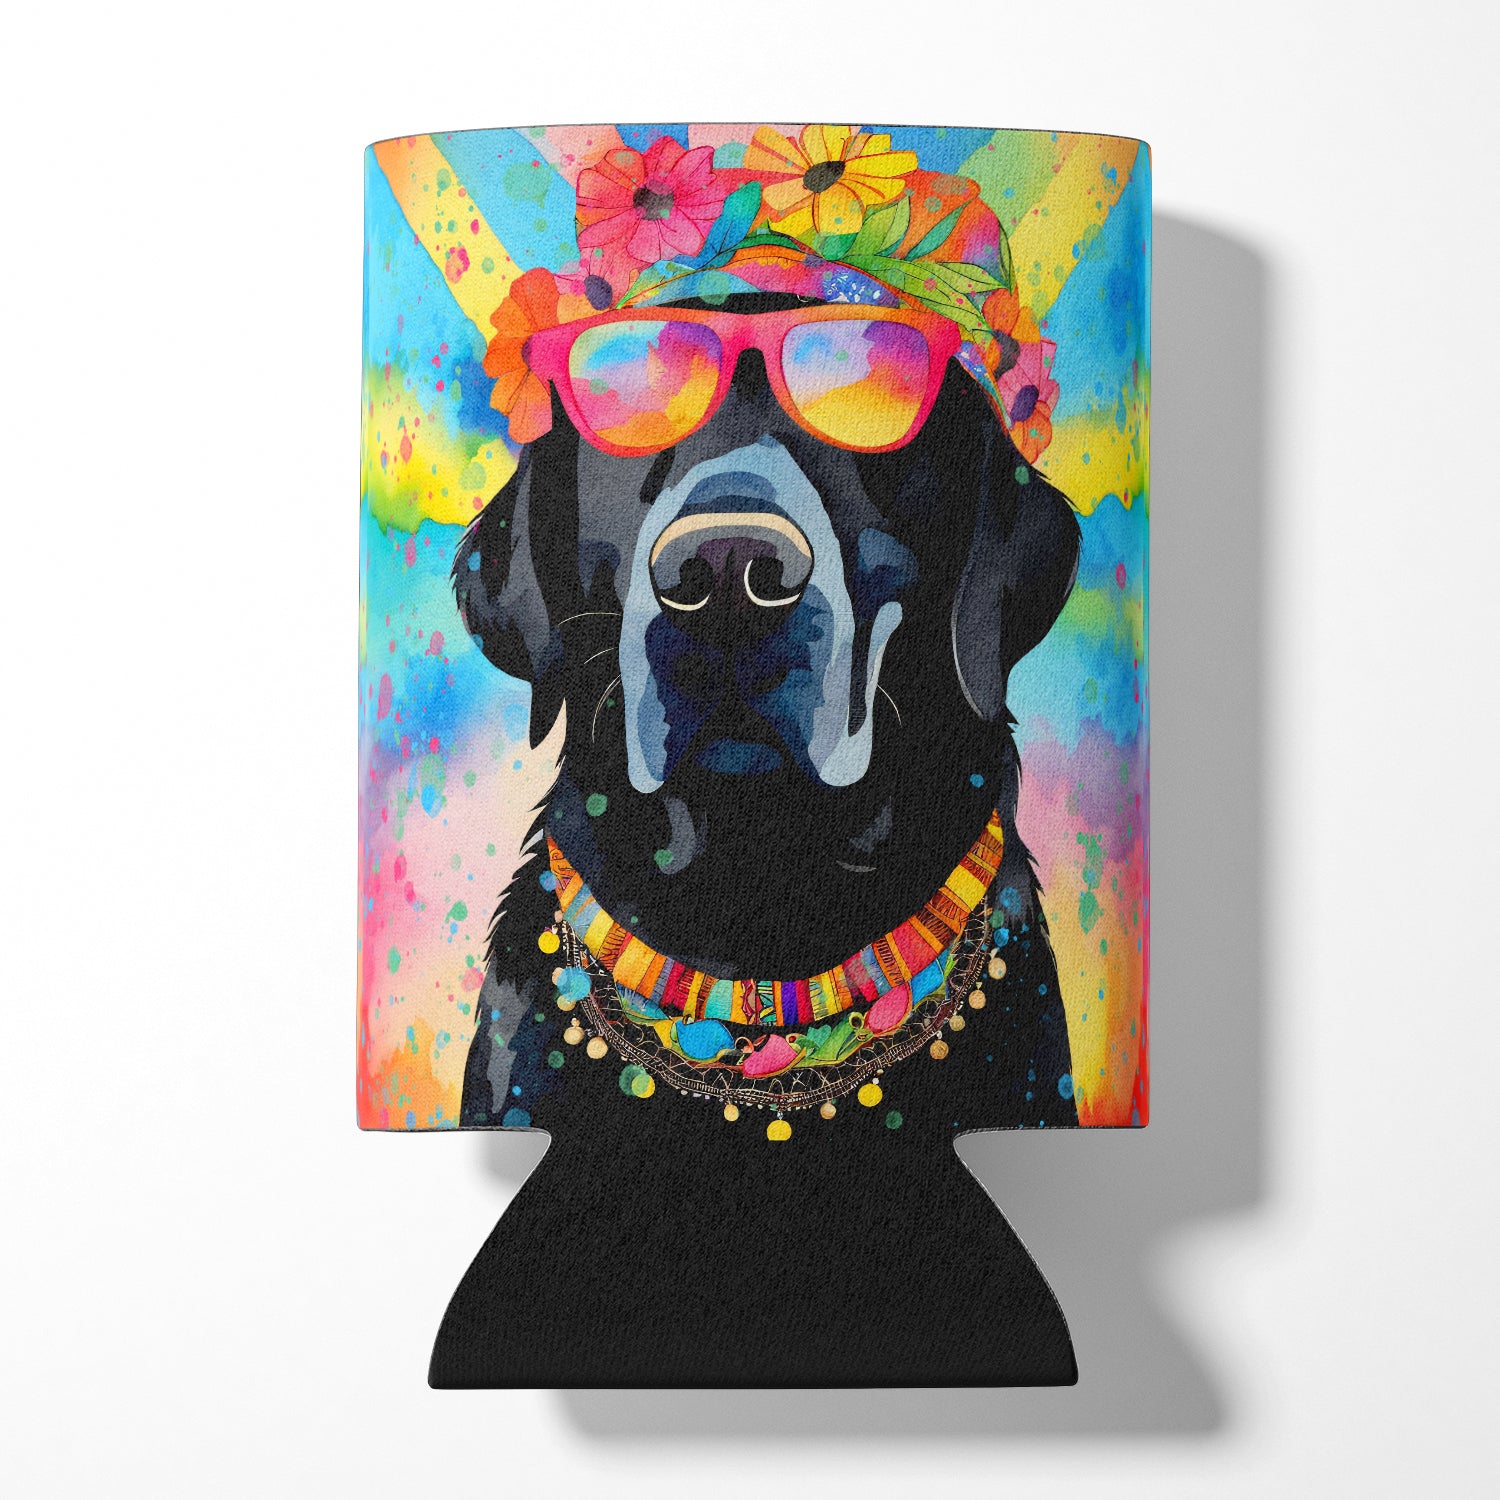 Buy this Black Labrador Hippie Dawg Can or Bottle Hugger